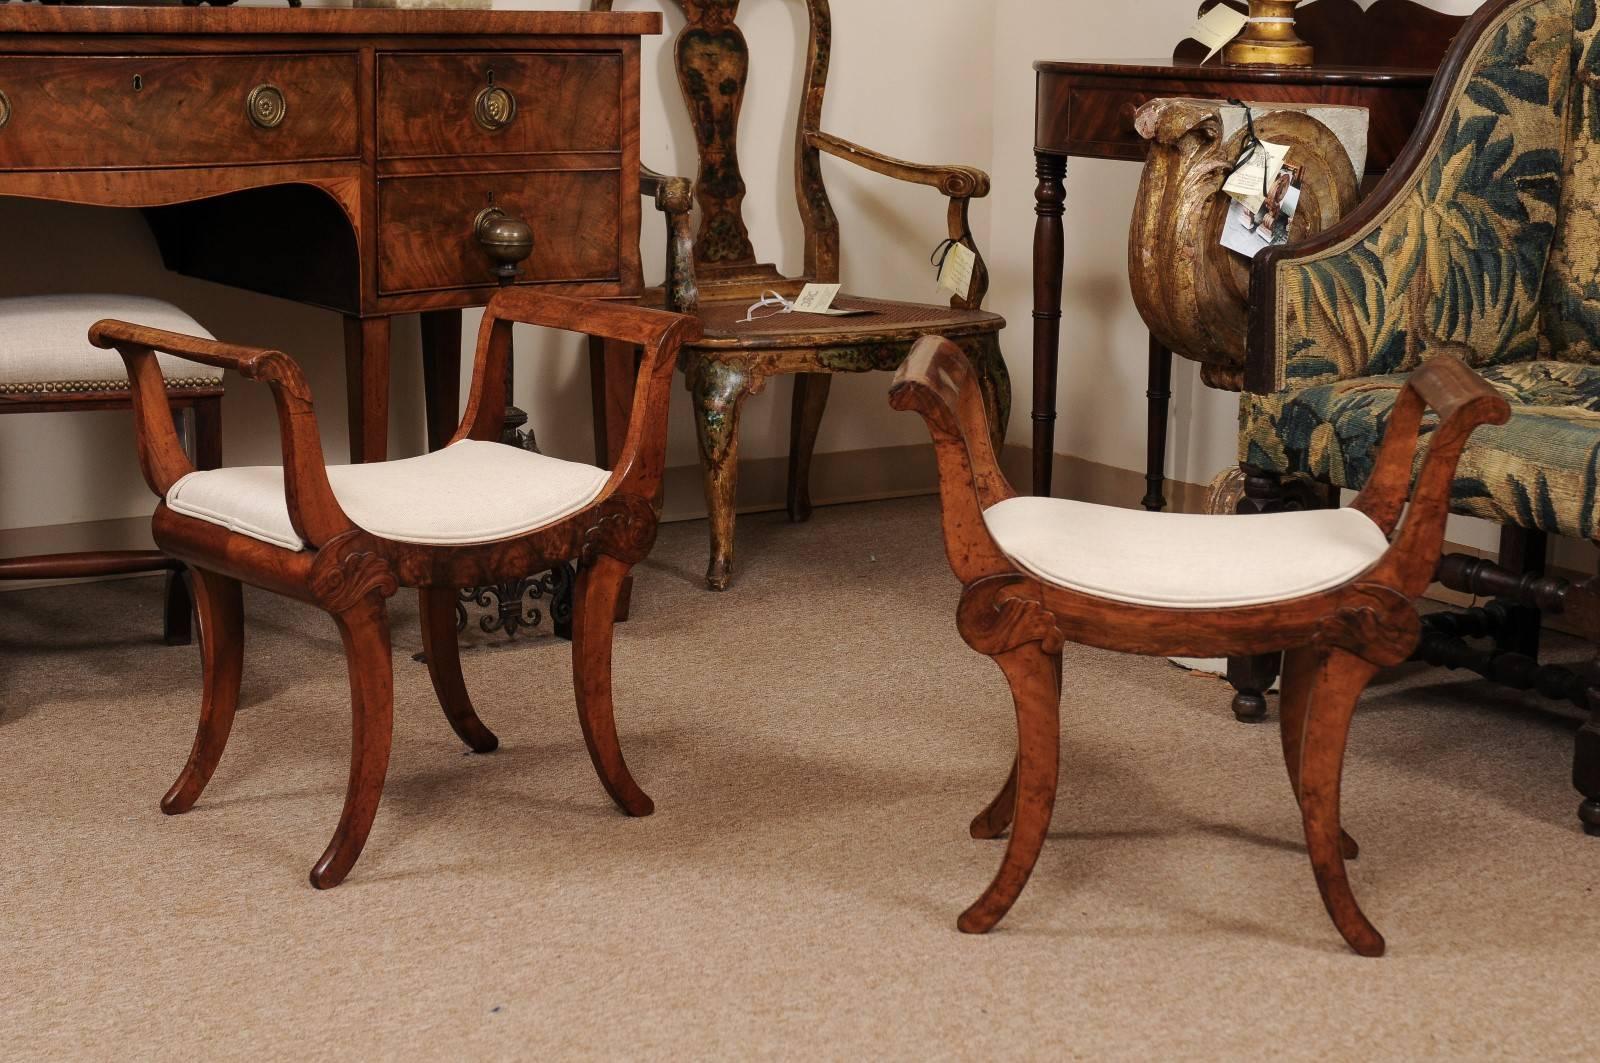 The pair of early 19th century Swiss walnut benches with scrolled arms, down swept upholstered seats and spayed legs. 

 